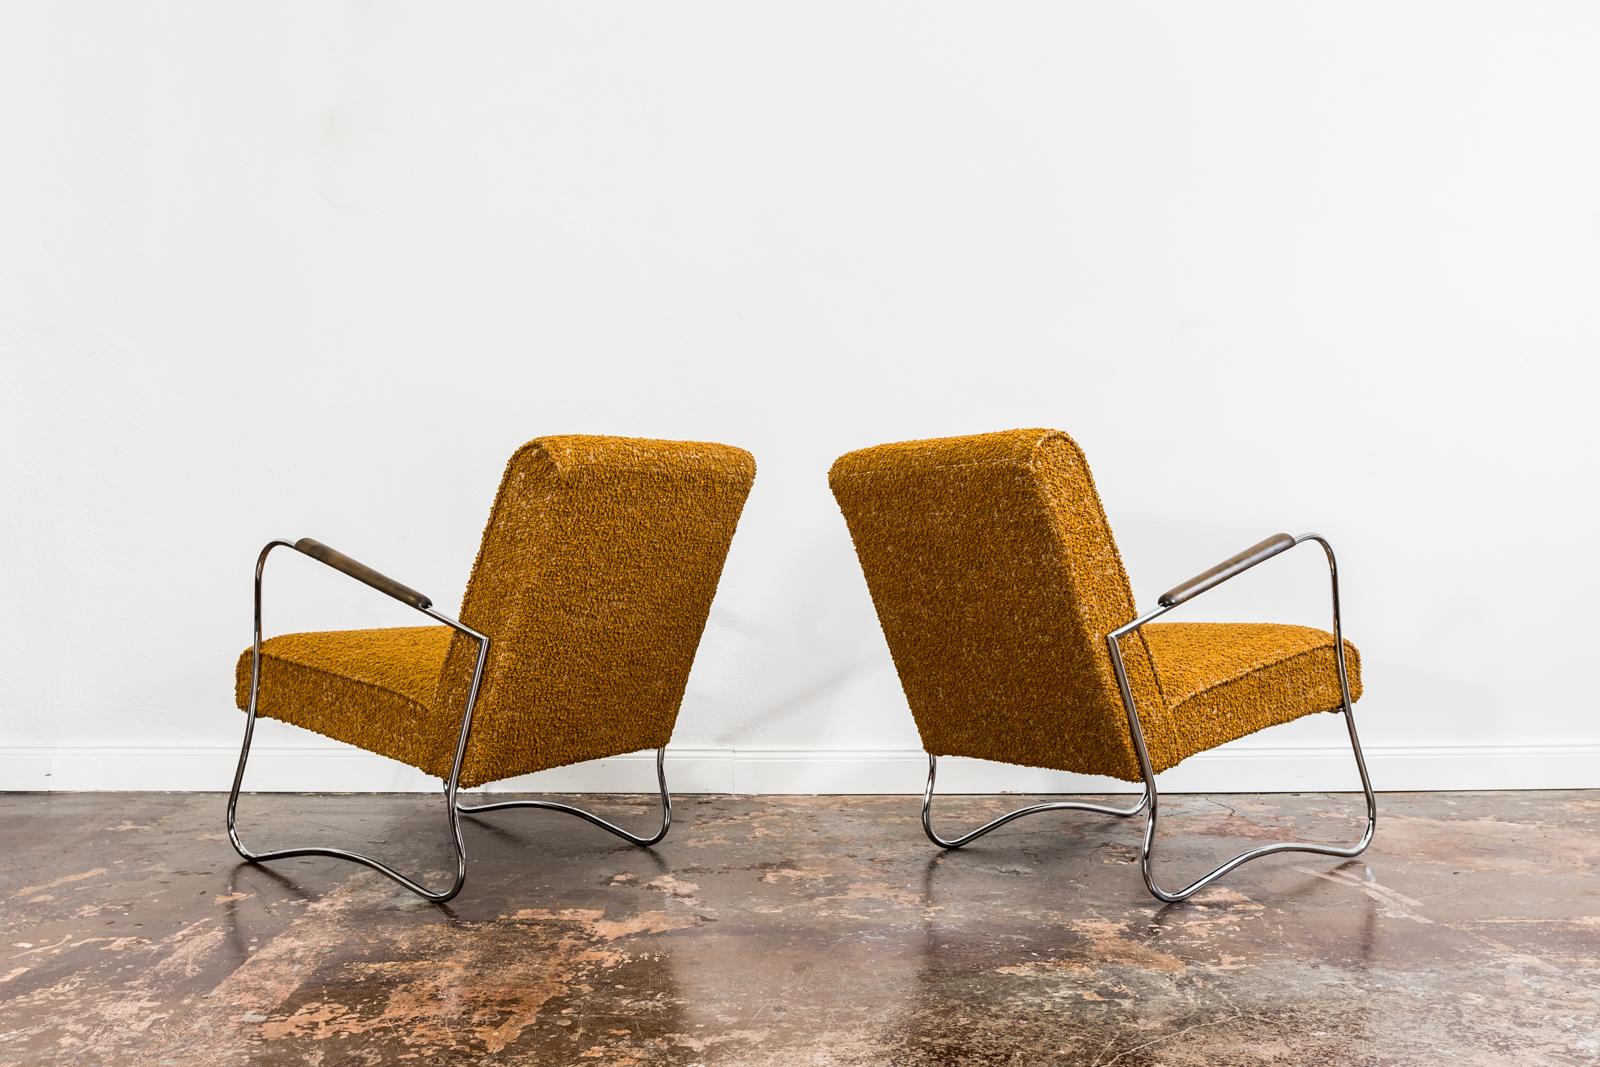 Pair Of Mid Century Armchairs From Fabryka Mebli Wschód Zadziele, 1950s In Good Condition For Sale In Wroclaw, PL